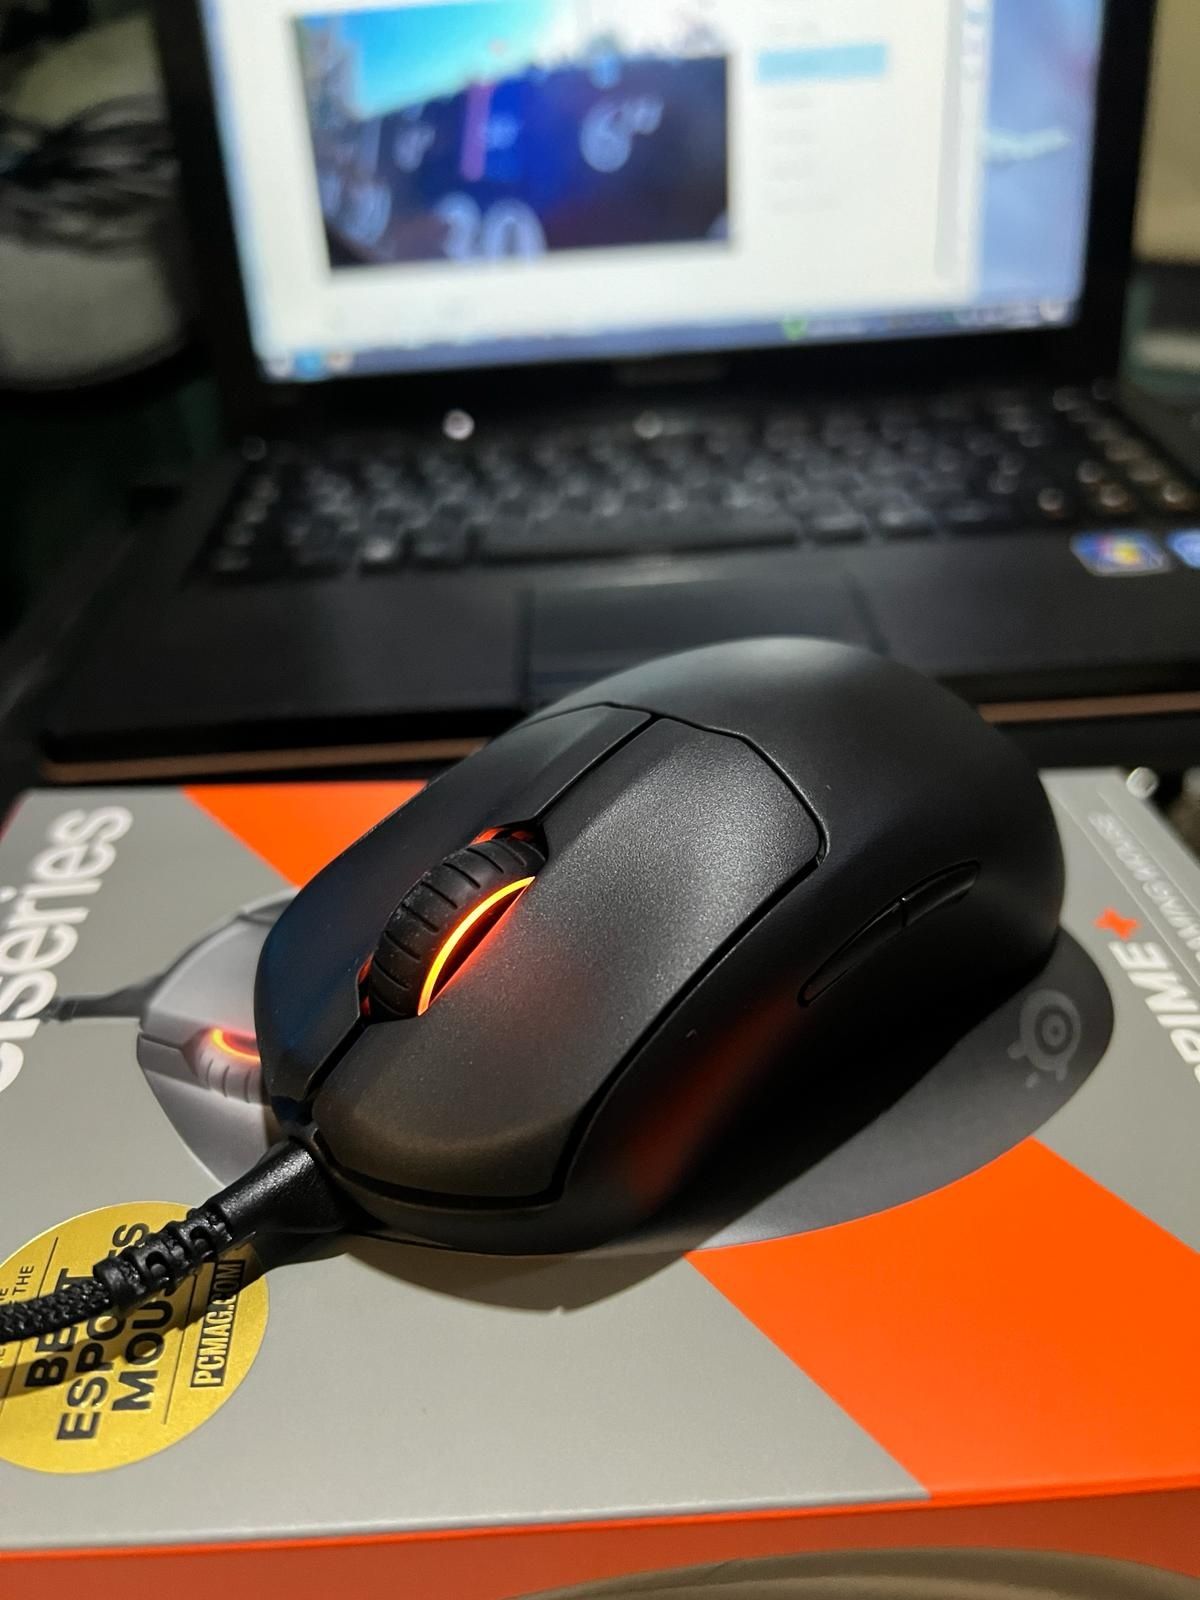 Mouse gaming steelseries Prime+ negru.Folosit 2 zile.Stare perfecta